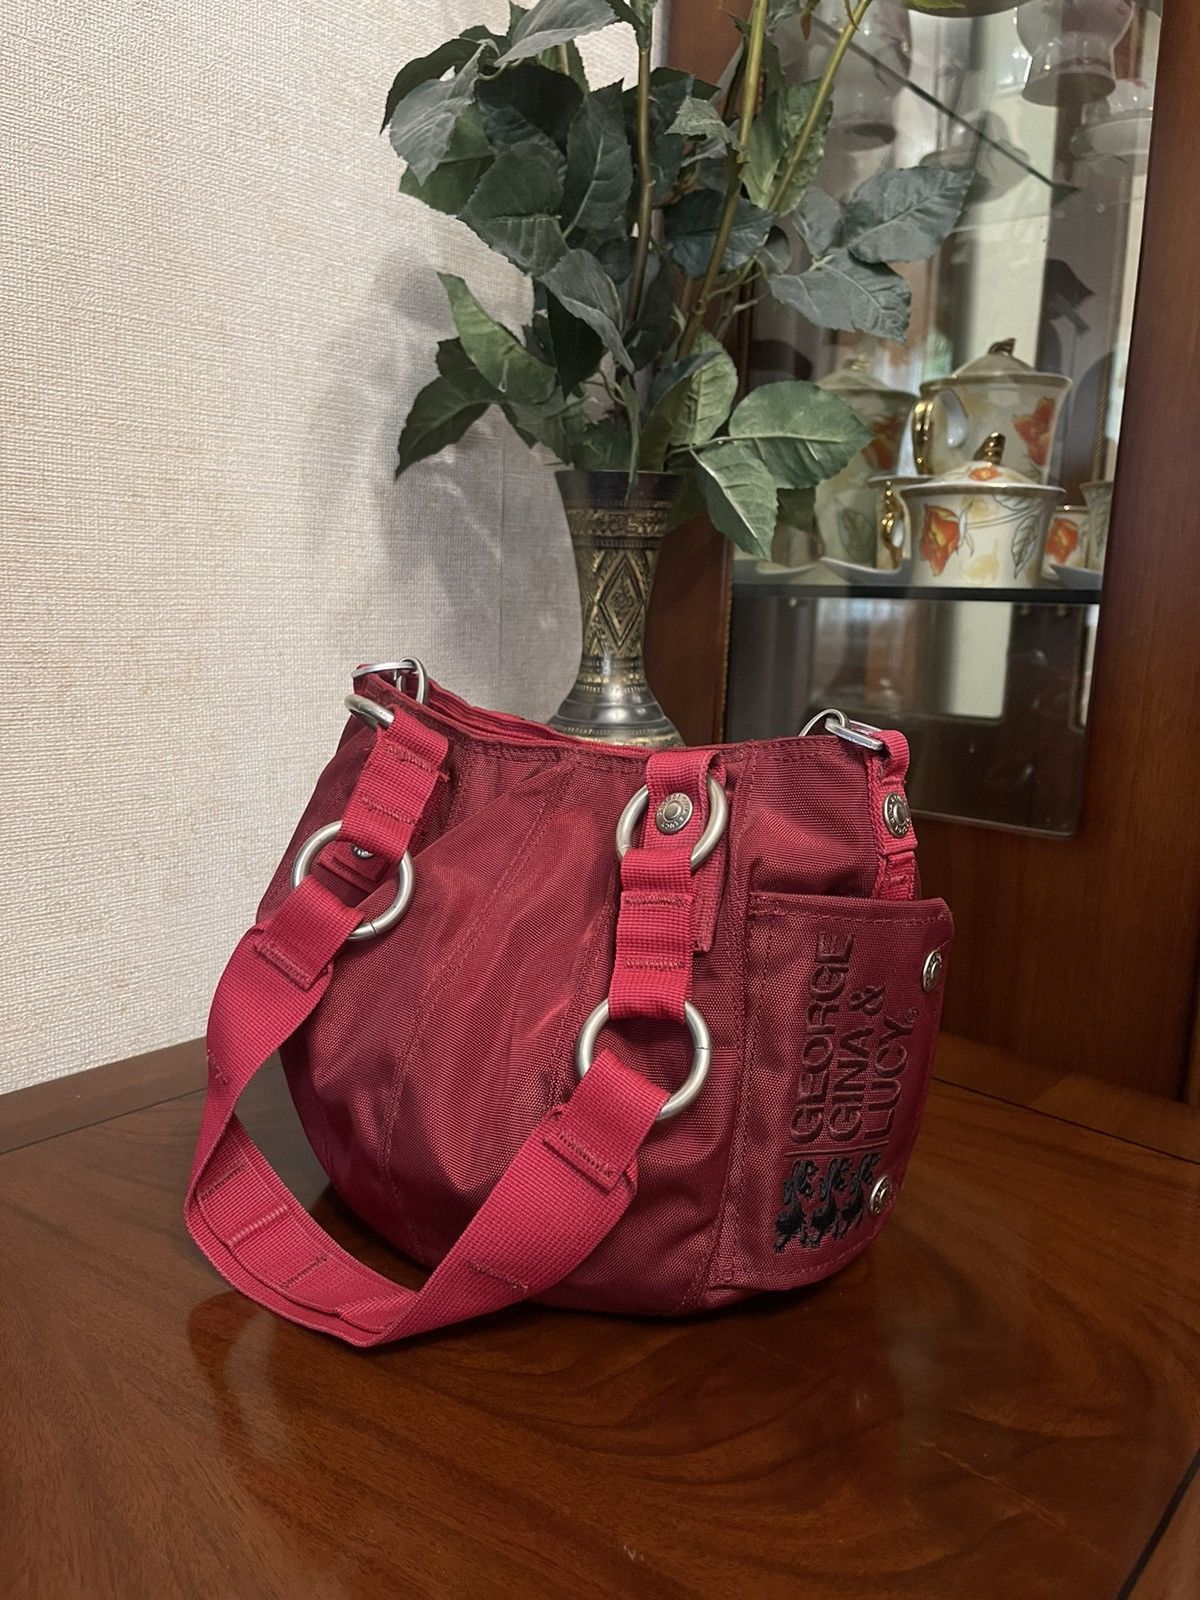 Japanese Brand George Gina&Lucy Cargo Puffy Punchbag Red Bag Alyx Style ...